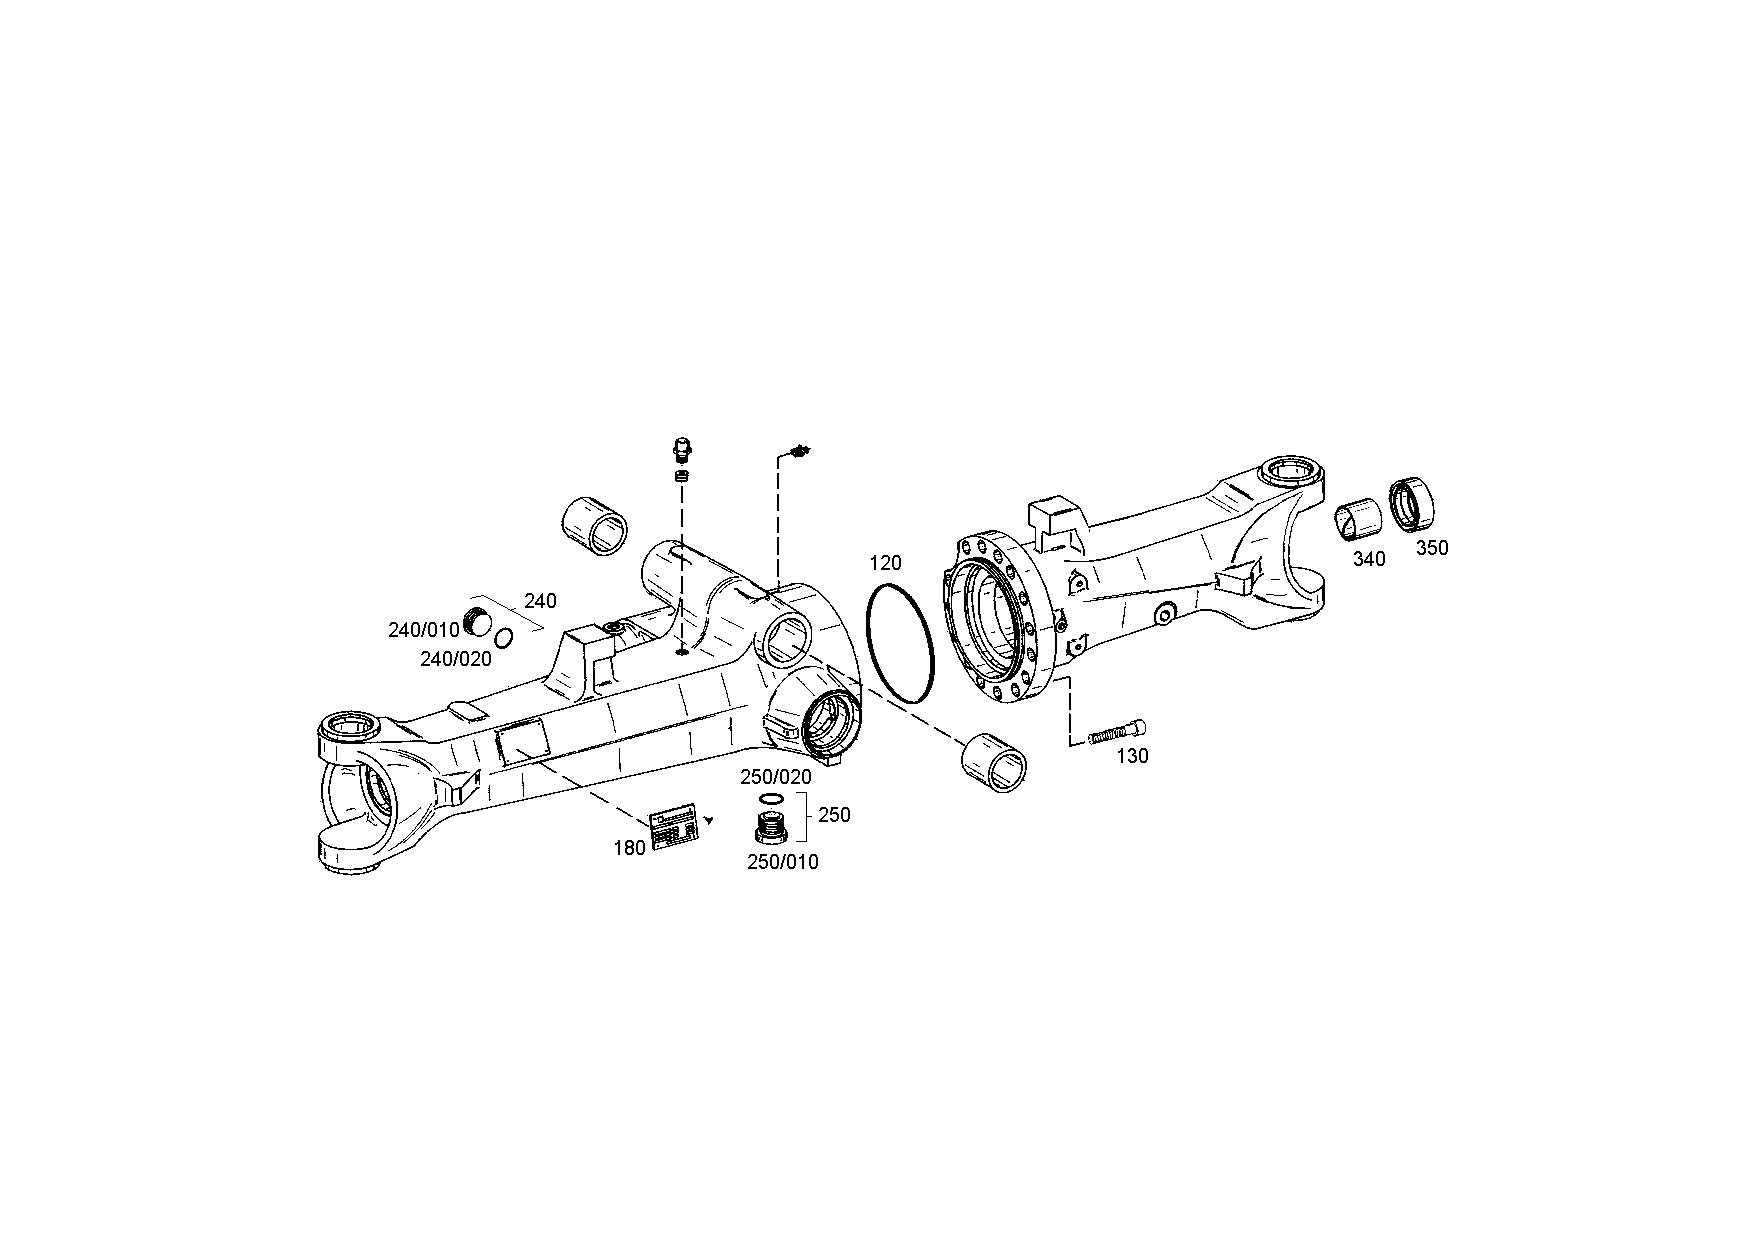 drawing for AGCO X485.024.706.000 - CAP SCREW (figure 2)